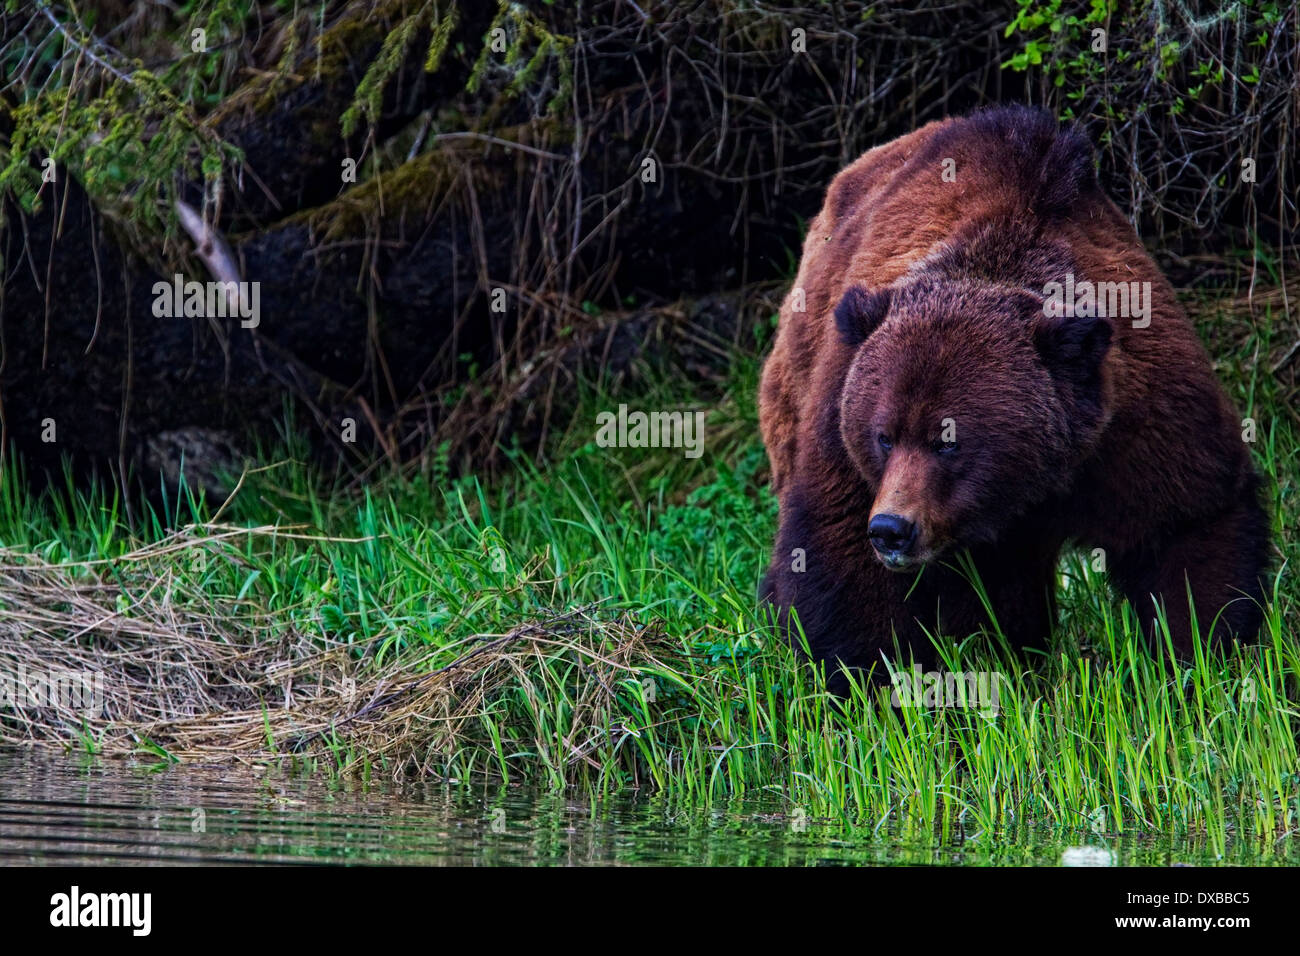 Grizzly Bear in the Wild, Great Bear Rainforest, BC, Kanada Stockfoto